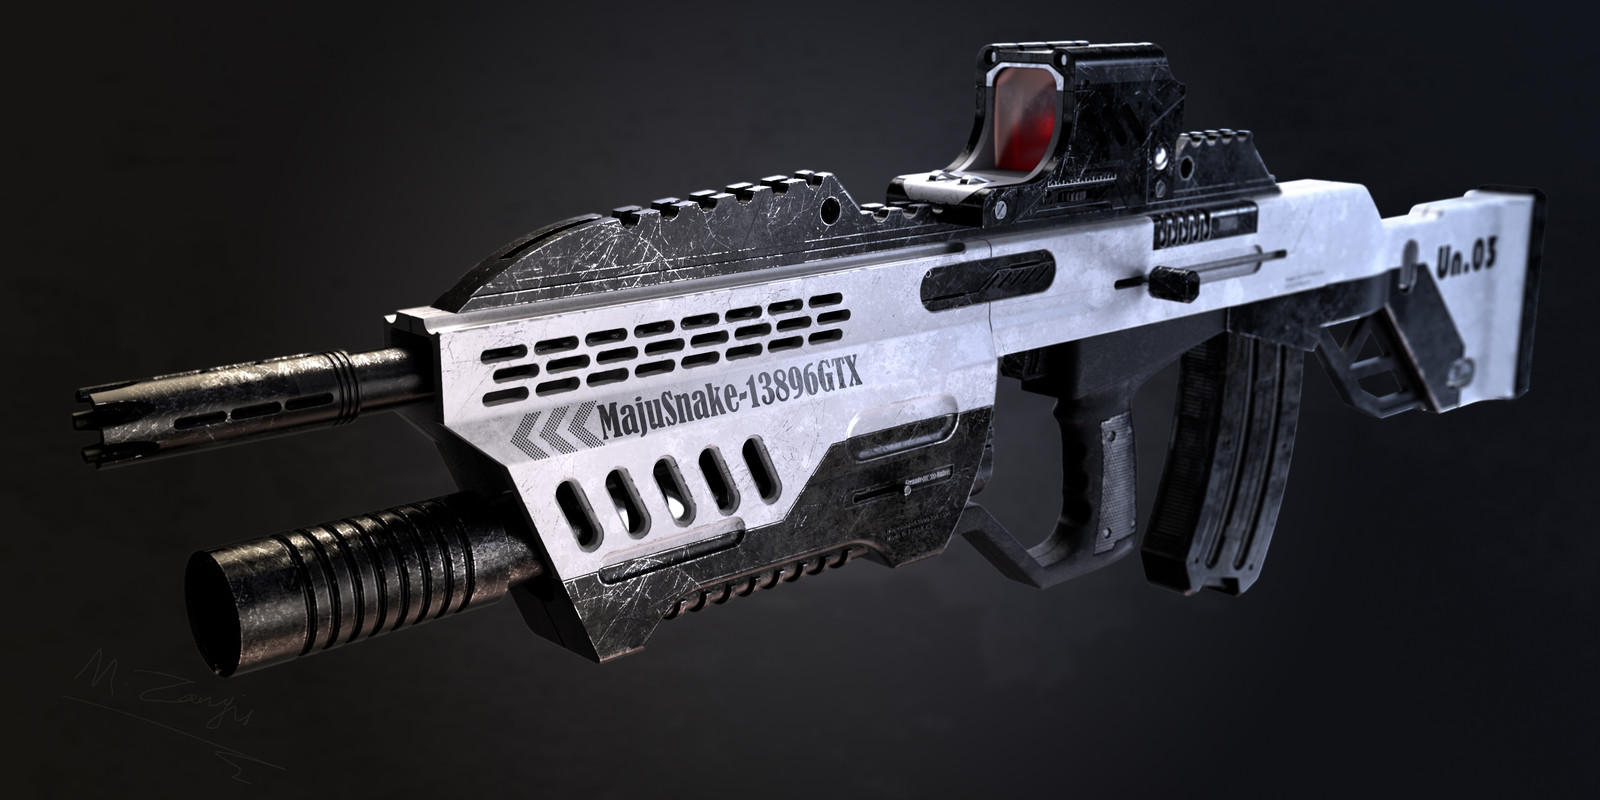 Scifi assult rifle with optic and grenade launcher- Rifle Shot